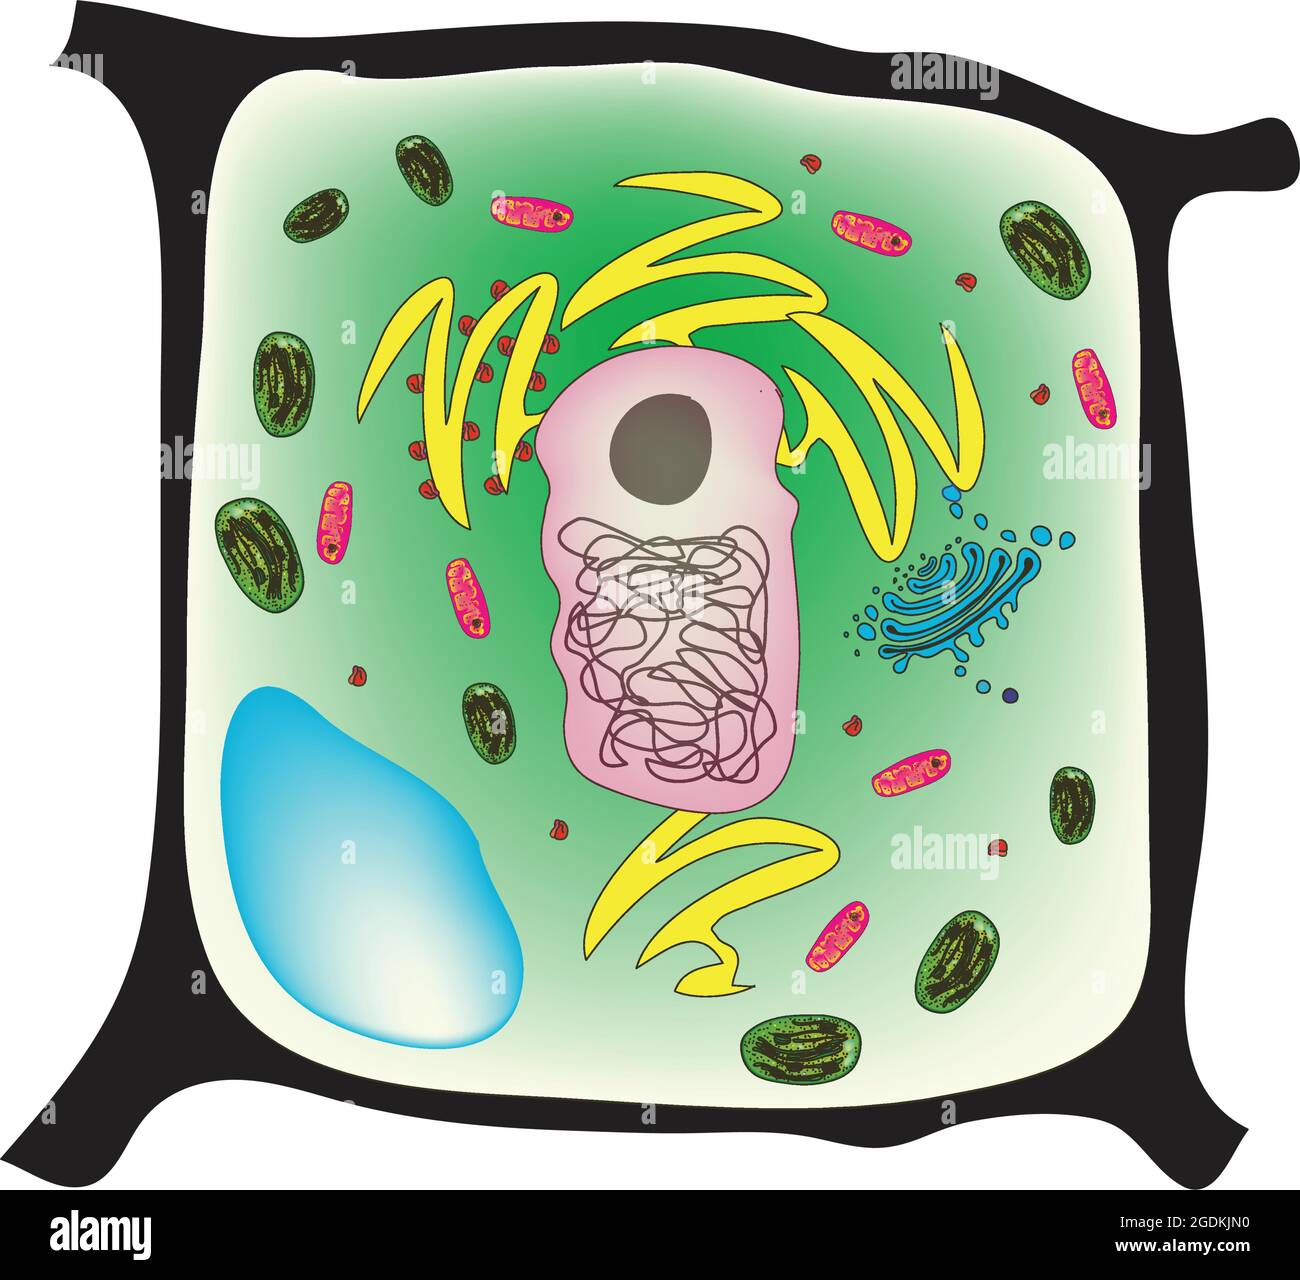 Plant cell, the basic unit of all plants. Plant cells, like animal cells, are eukaryotic, meaning they have a membrane-bound nucleus and organelles. Stock Vector